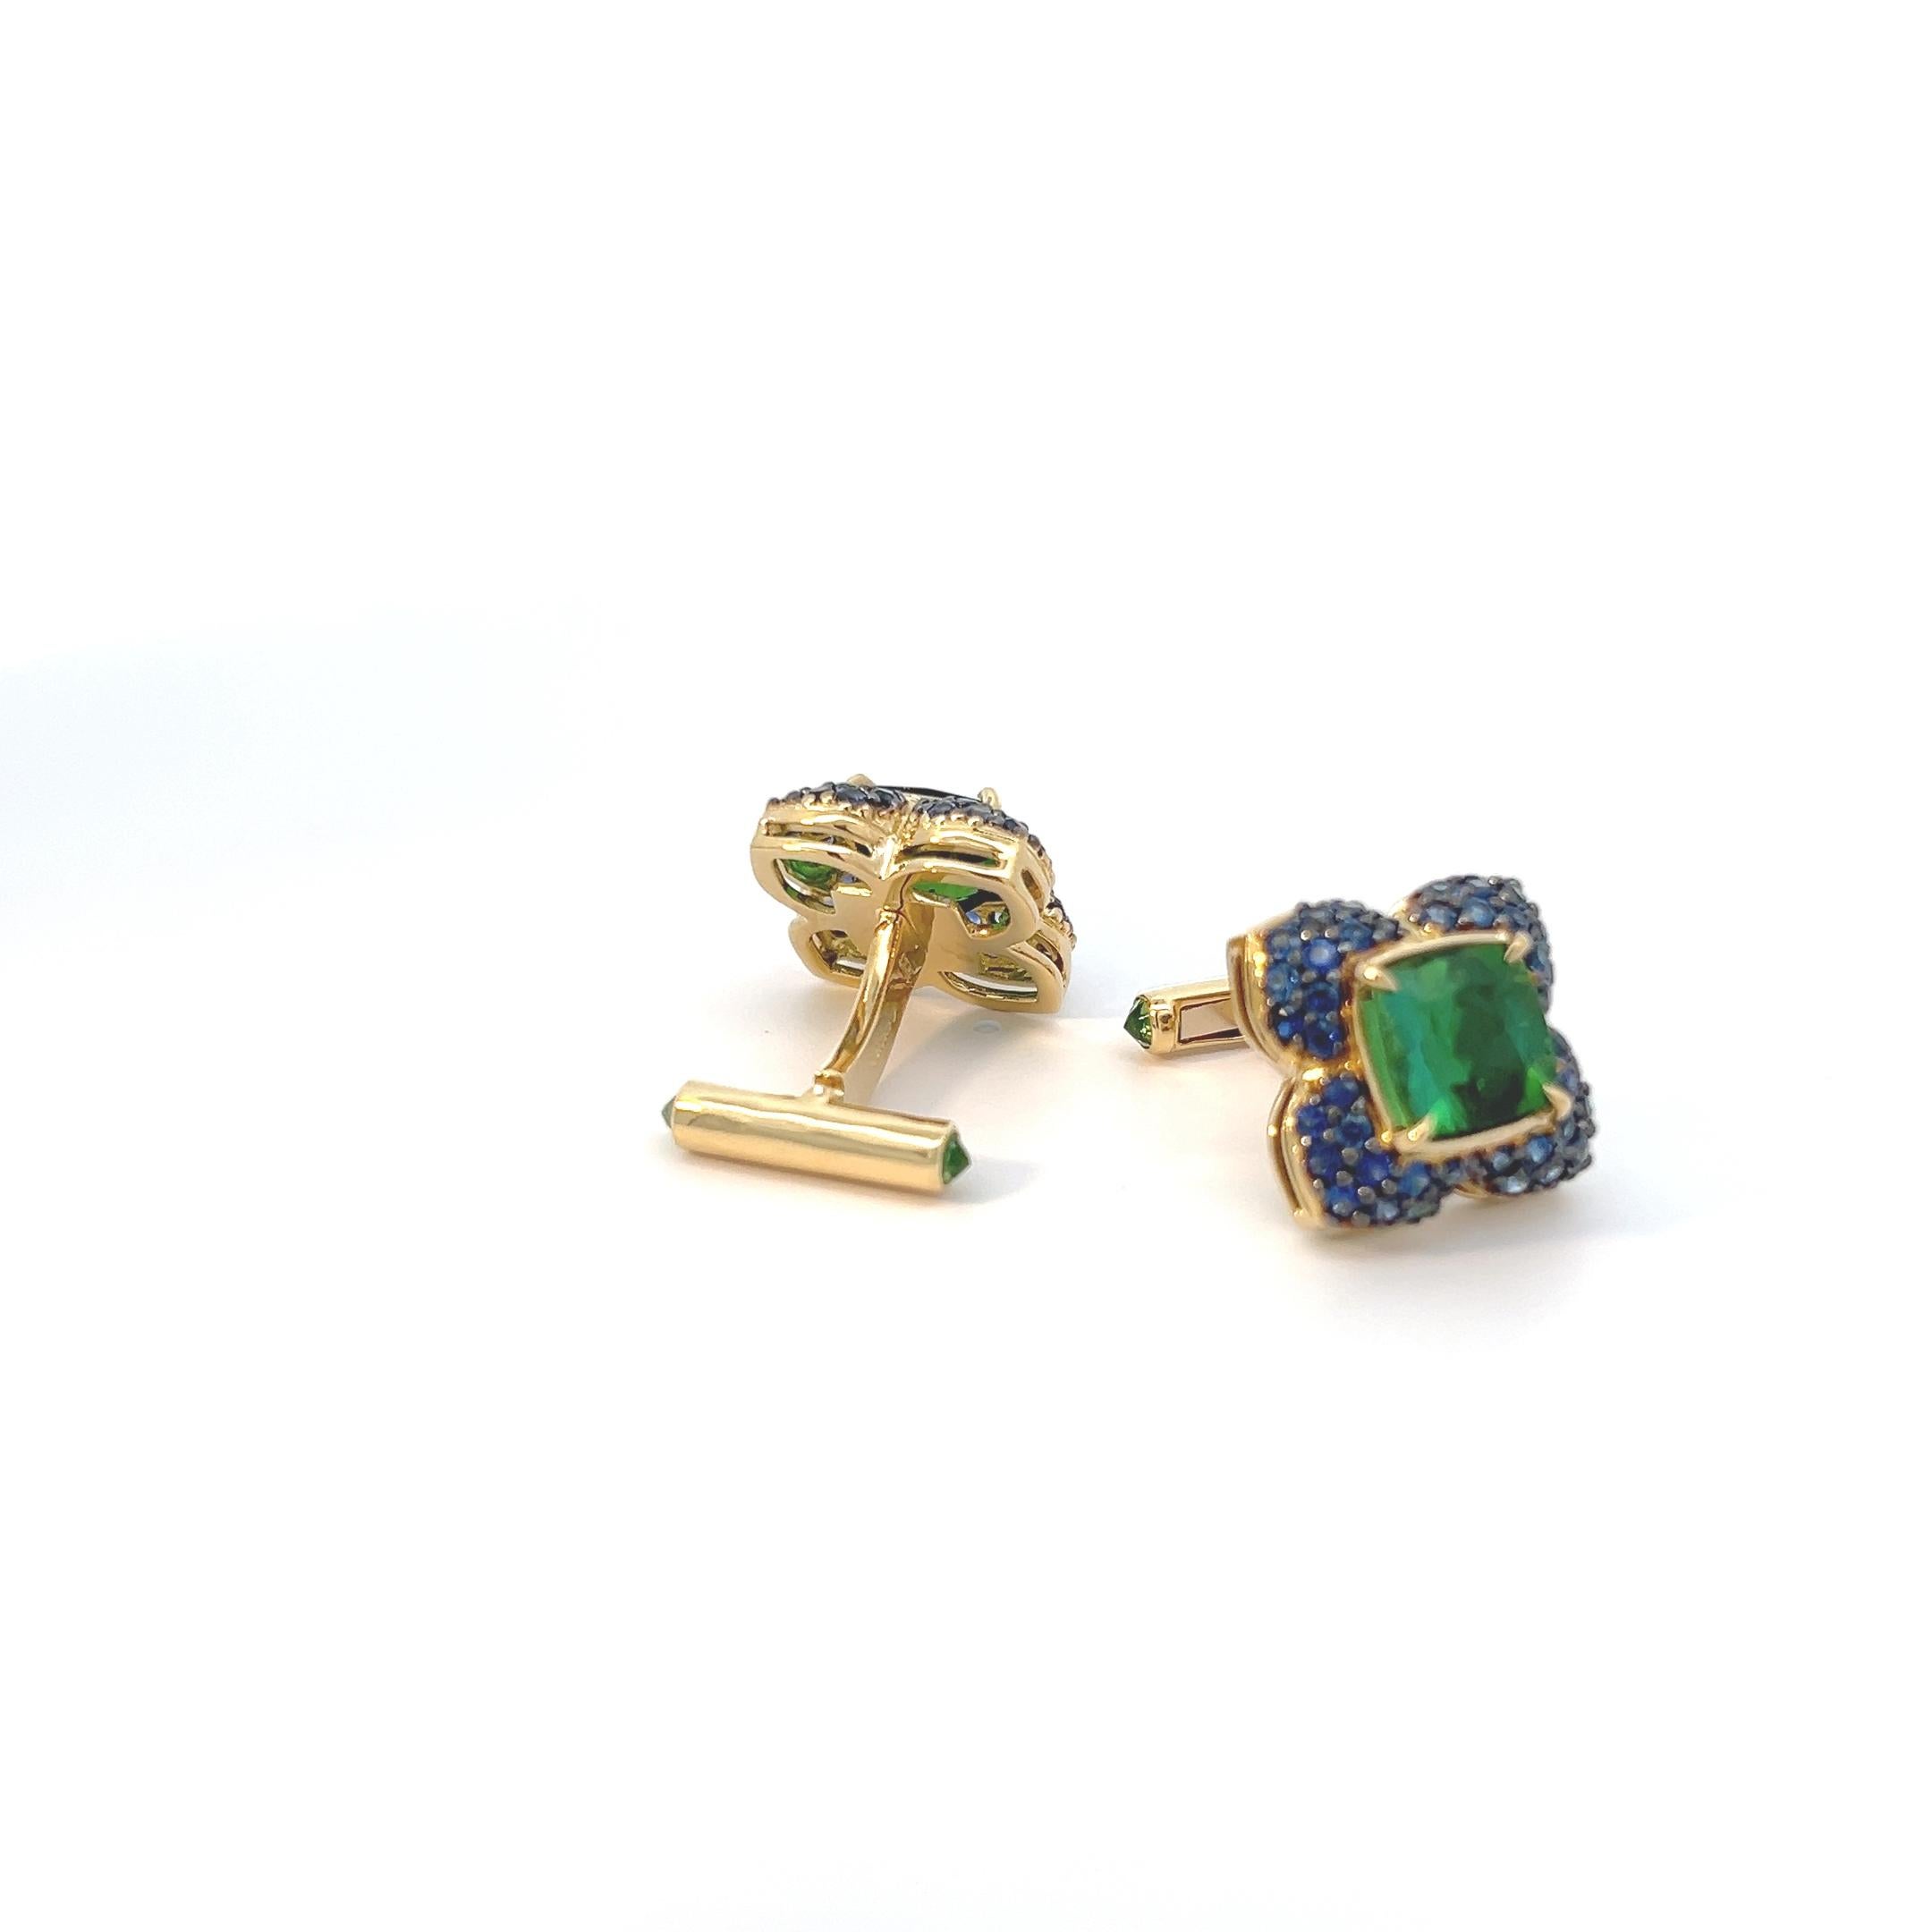 Introducing a stunning pair of cufflinks crafted in lustrous 18k yellow gold. At the heart of each cufflink gleams a captivating array of exquisite green tourmalines, totaling approximately 9 carats. These verdant gemstones command attention, each